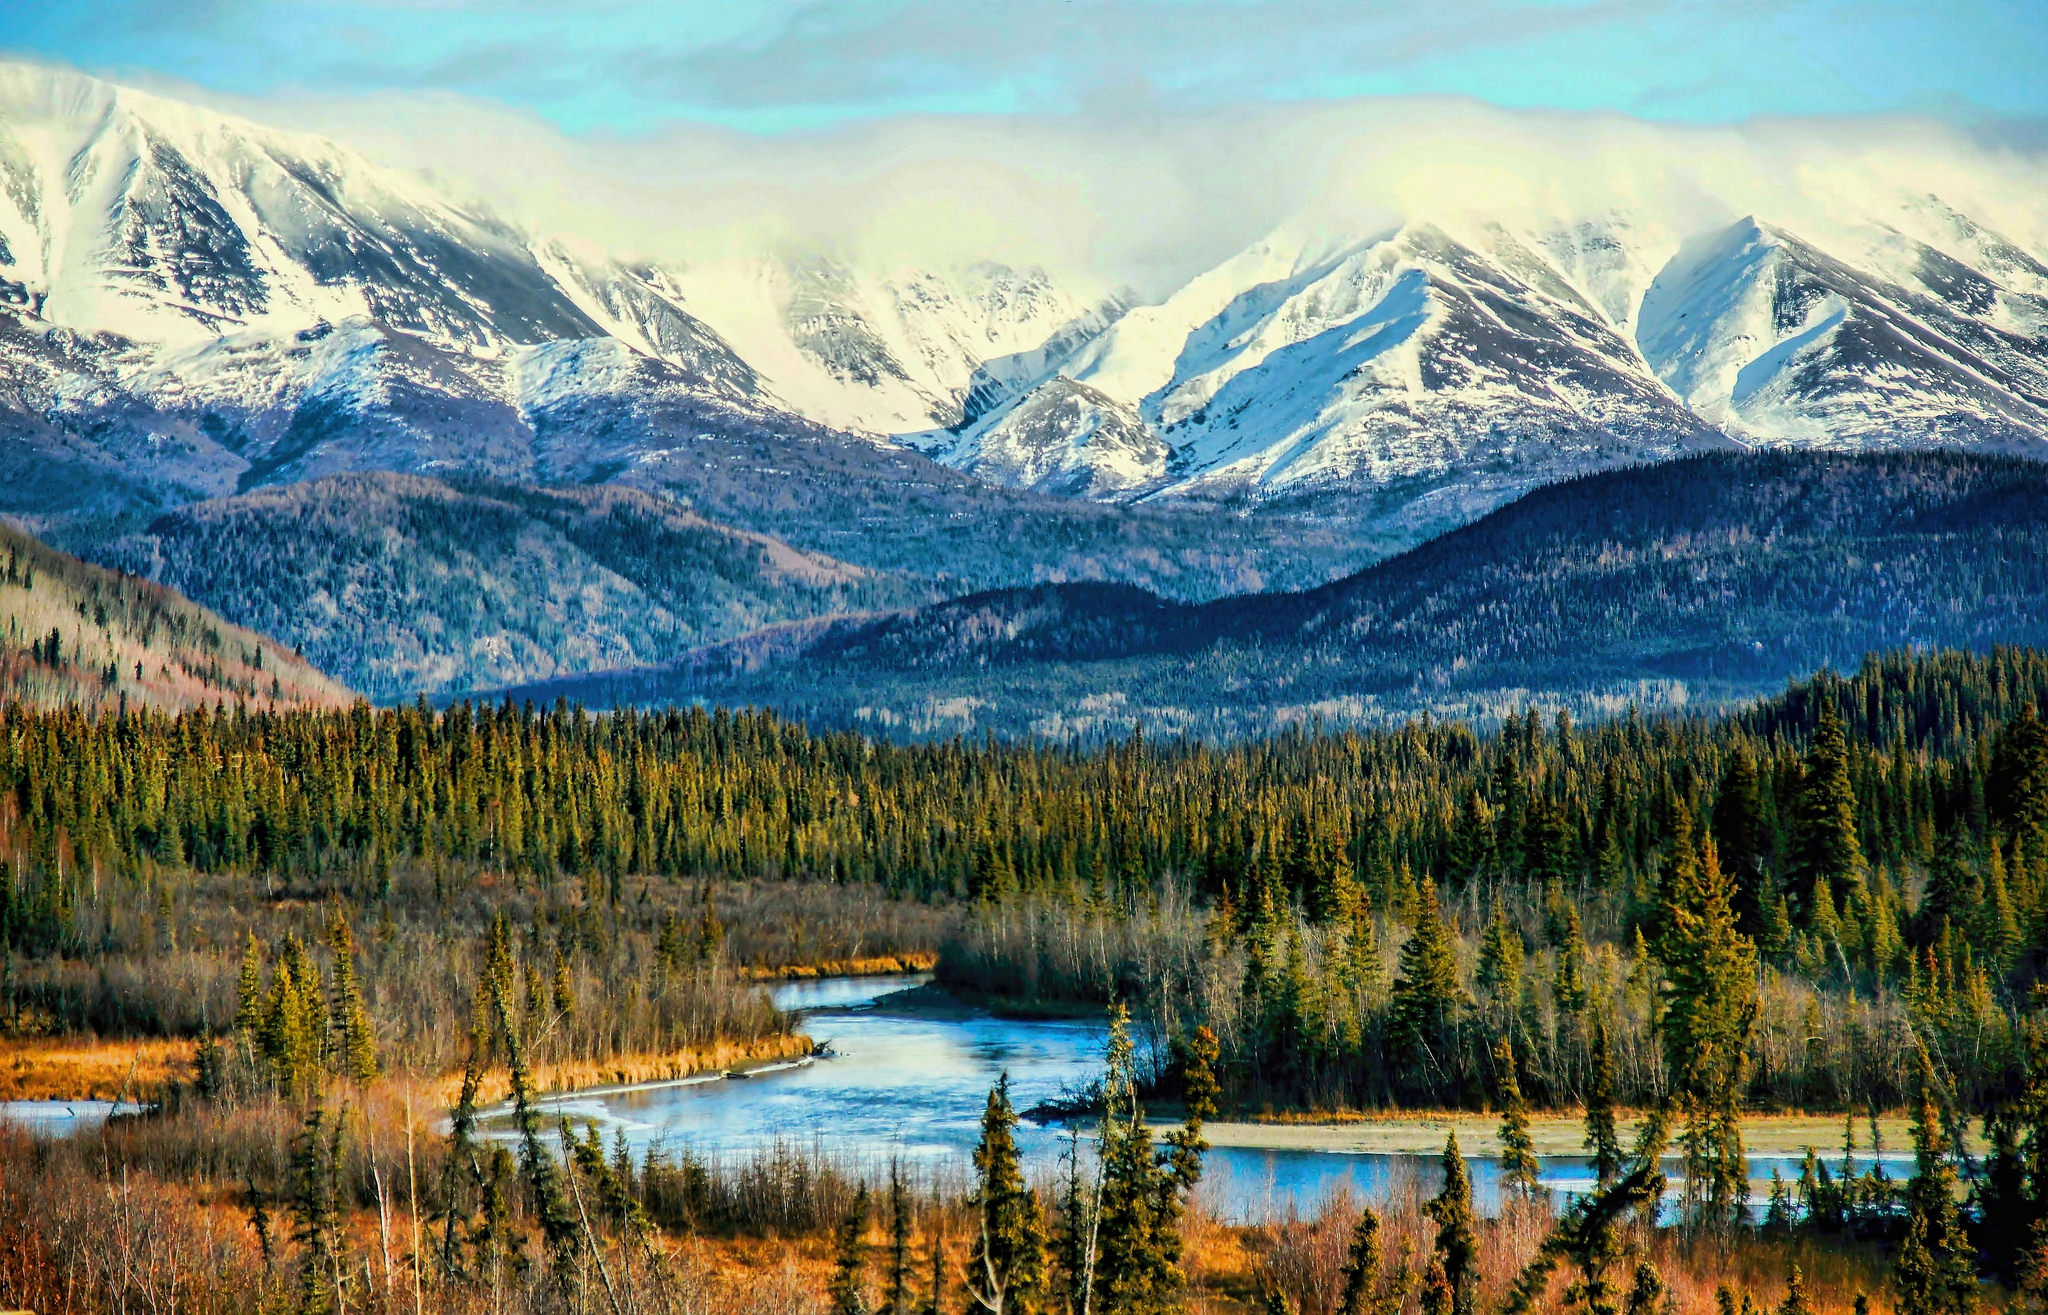 Download mobile wallpaper Landscape, Nature, Snow, Mountain, Forest, Earth, River, Alaska for free.